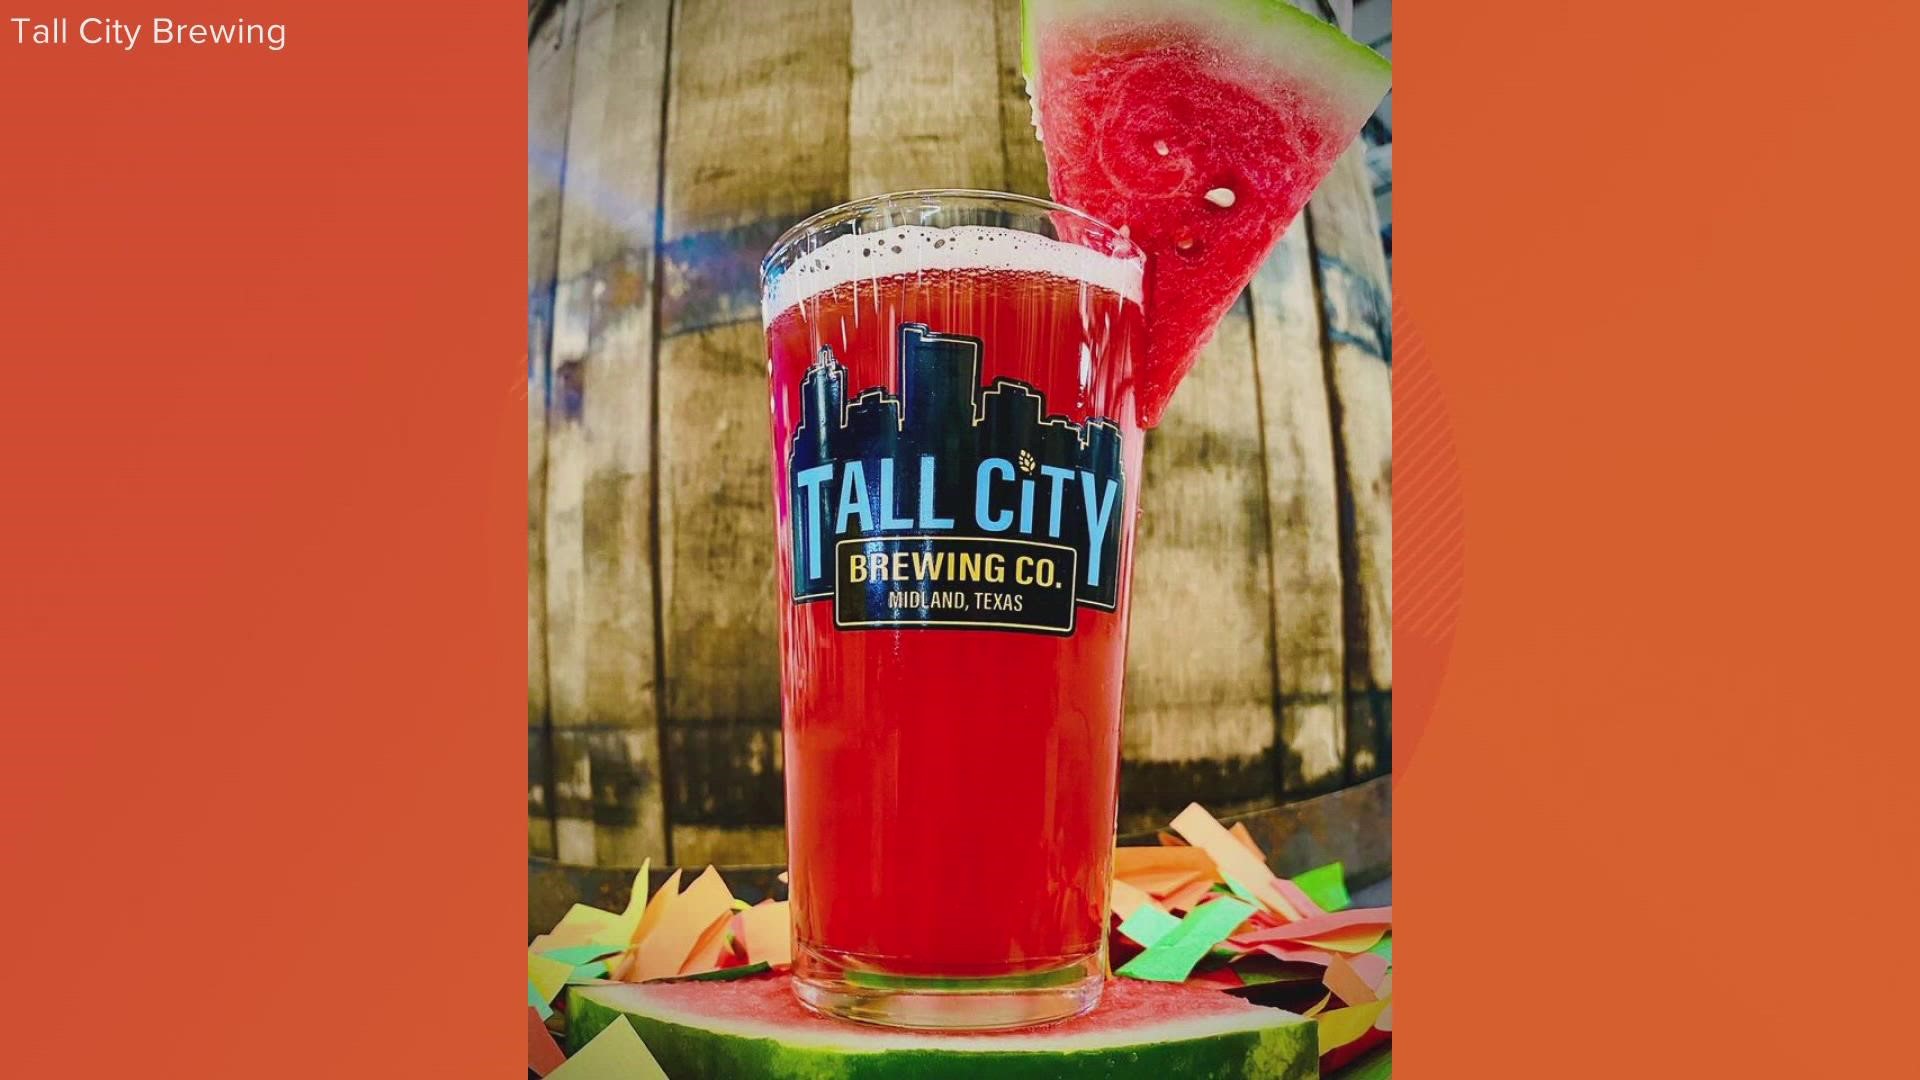 The brewery has partnered up again with the Mandujano brothers Produce to create a Pecos Watermelon beer.